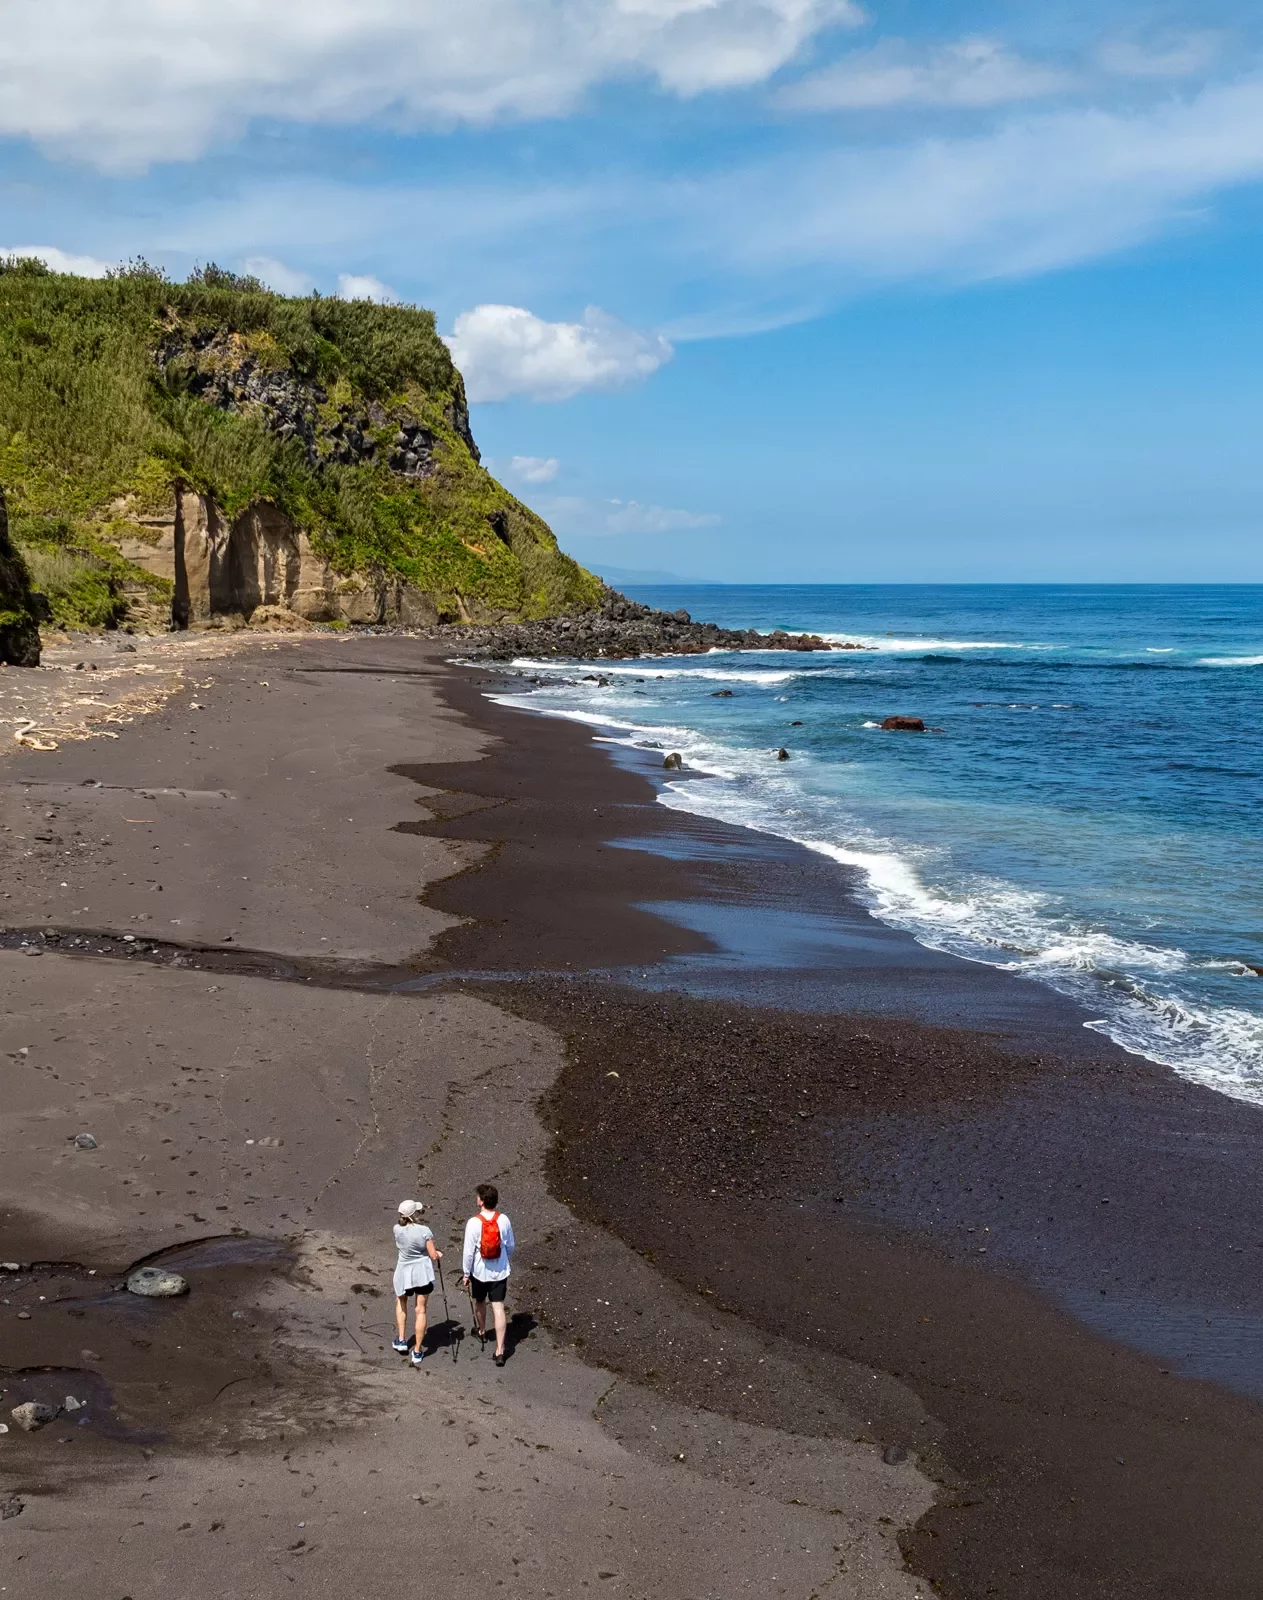 Two people walking on the beach, walking towards a grass-covered cliff